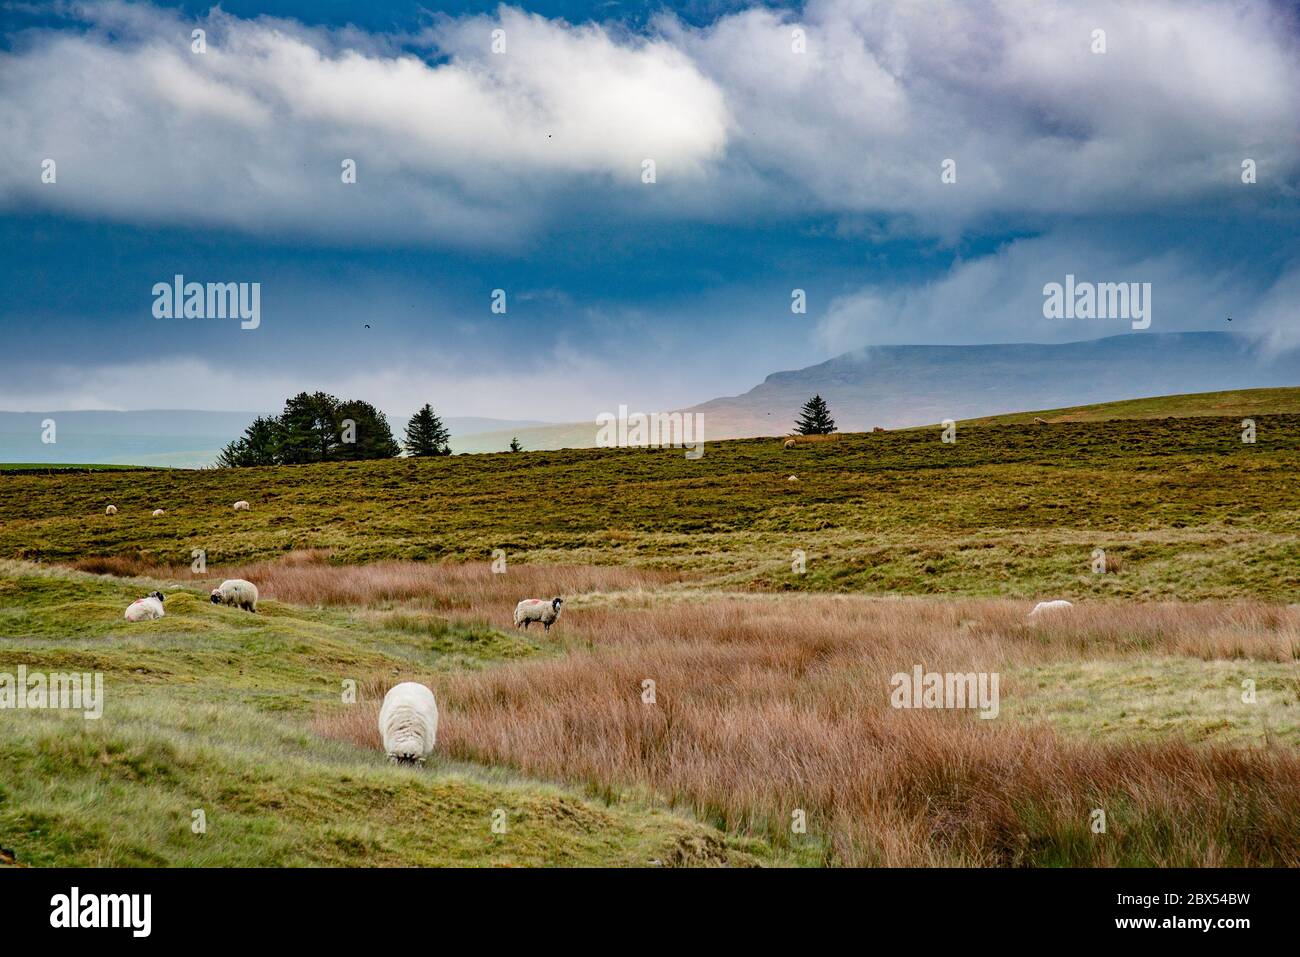 Kirkby Stephen, Cumbria, UK. 4th June, 2020. Showery weather causing a horizontal rainbow on the fells near Kirkby Stephen, Cumbria. Credit: John Eveson/Alamy Live News Stock Photo